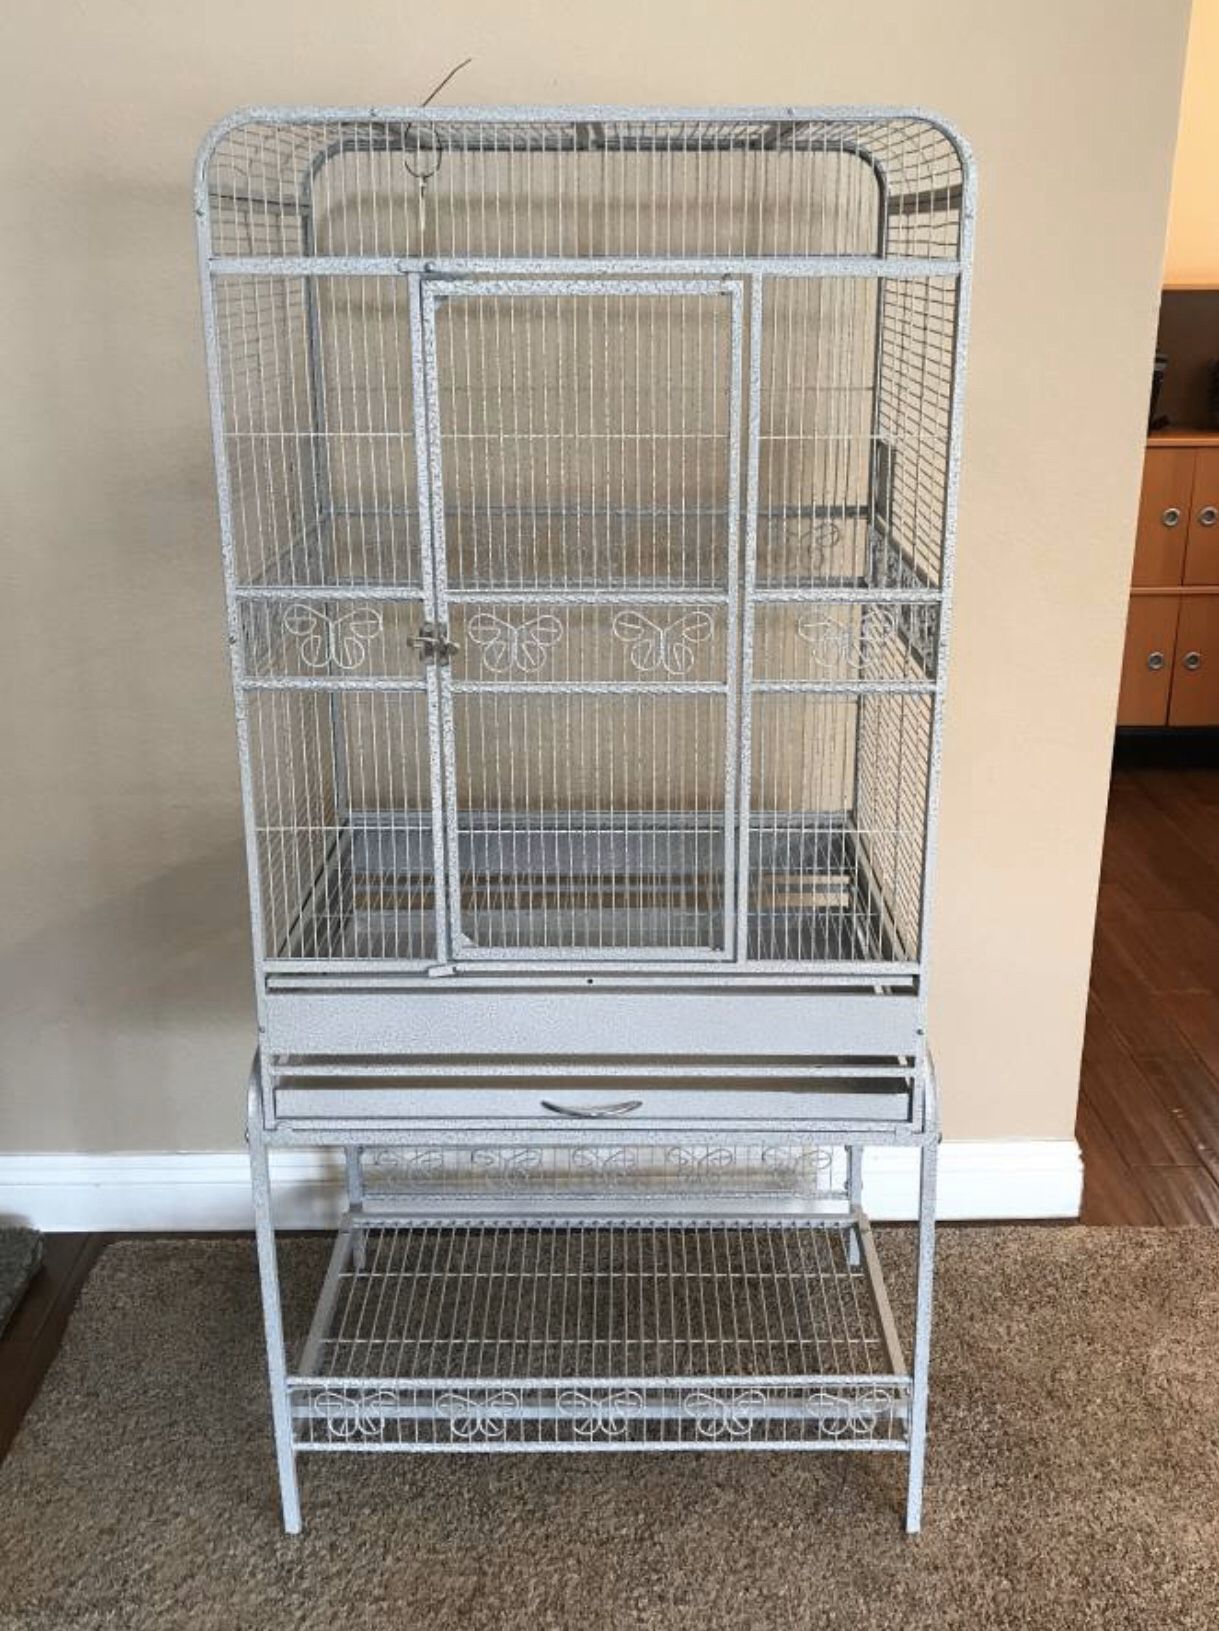 Playtop Bird Cage with Stand and Cover